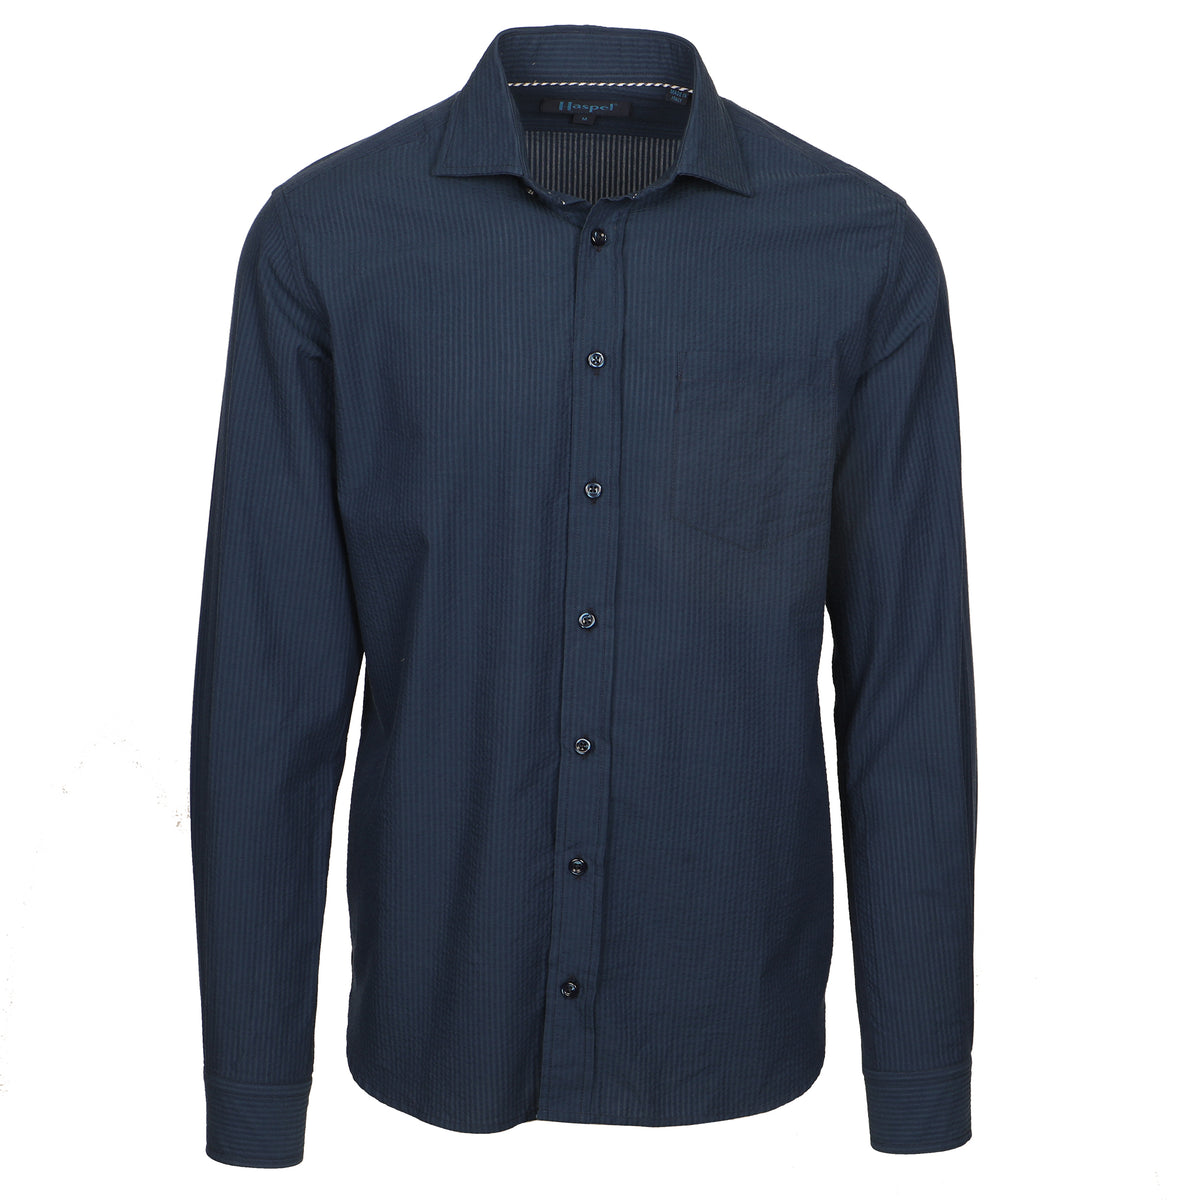 Seersucker all year long in a huey blue seersucker shirt. Subtle, lightweight, and a texture they begs a second look.  100% Cotton Seersucker  •  Spread Collar  •  Long Sleeve  •  Chest Pocket  •  Machine Washable  •  Made in Italy